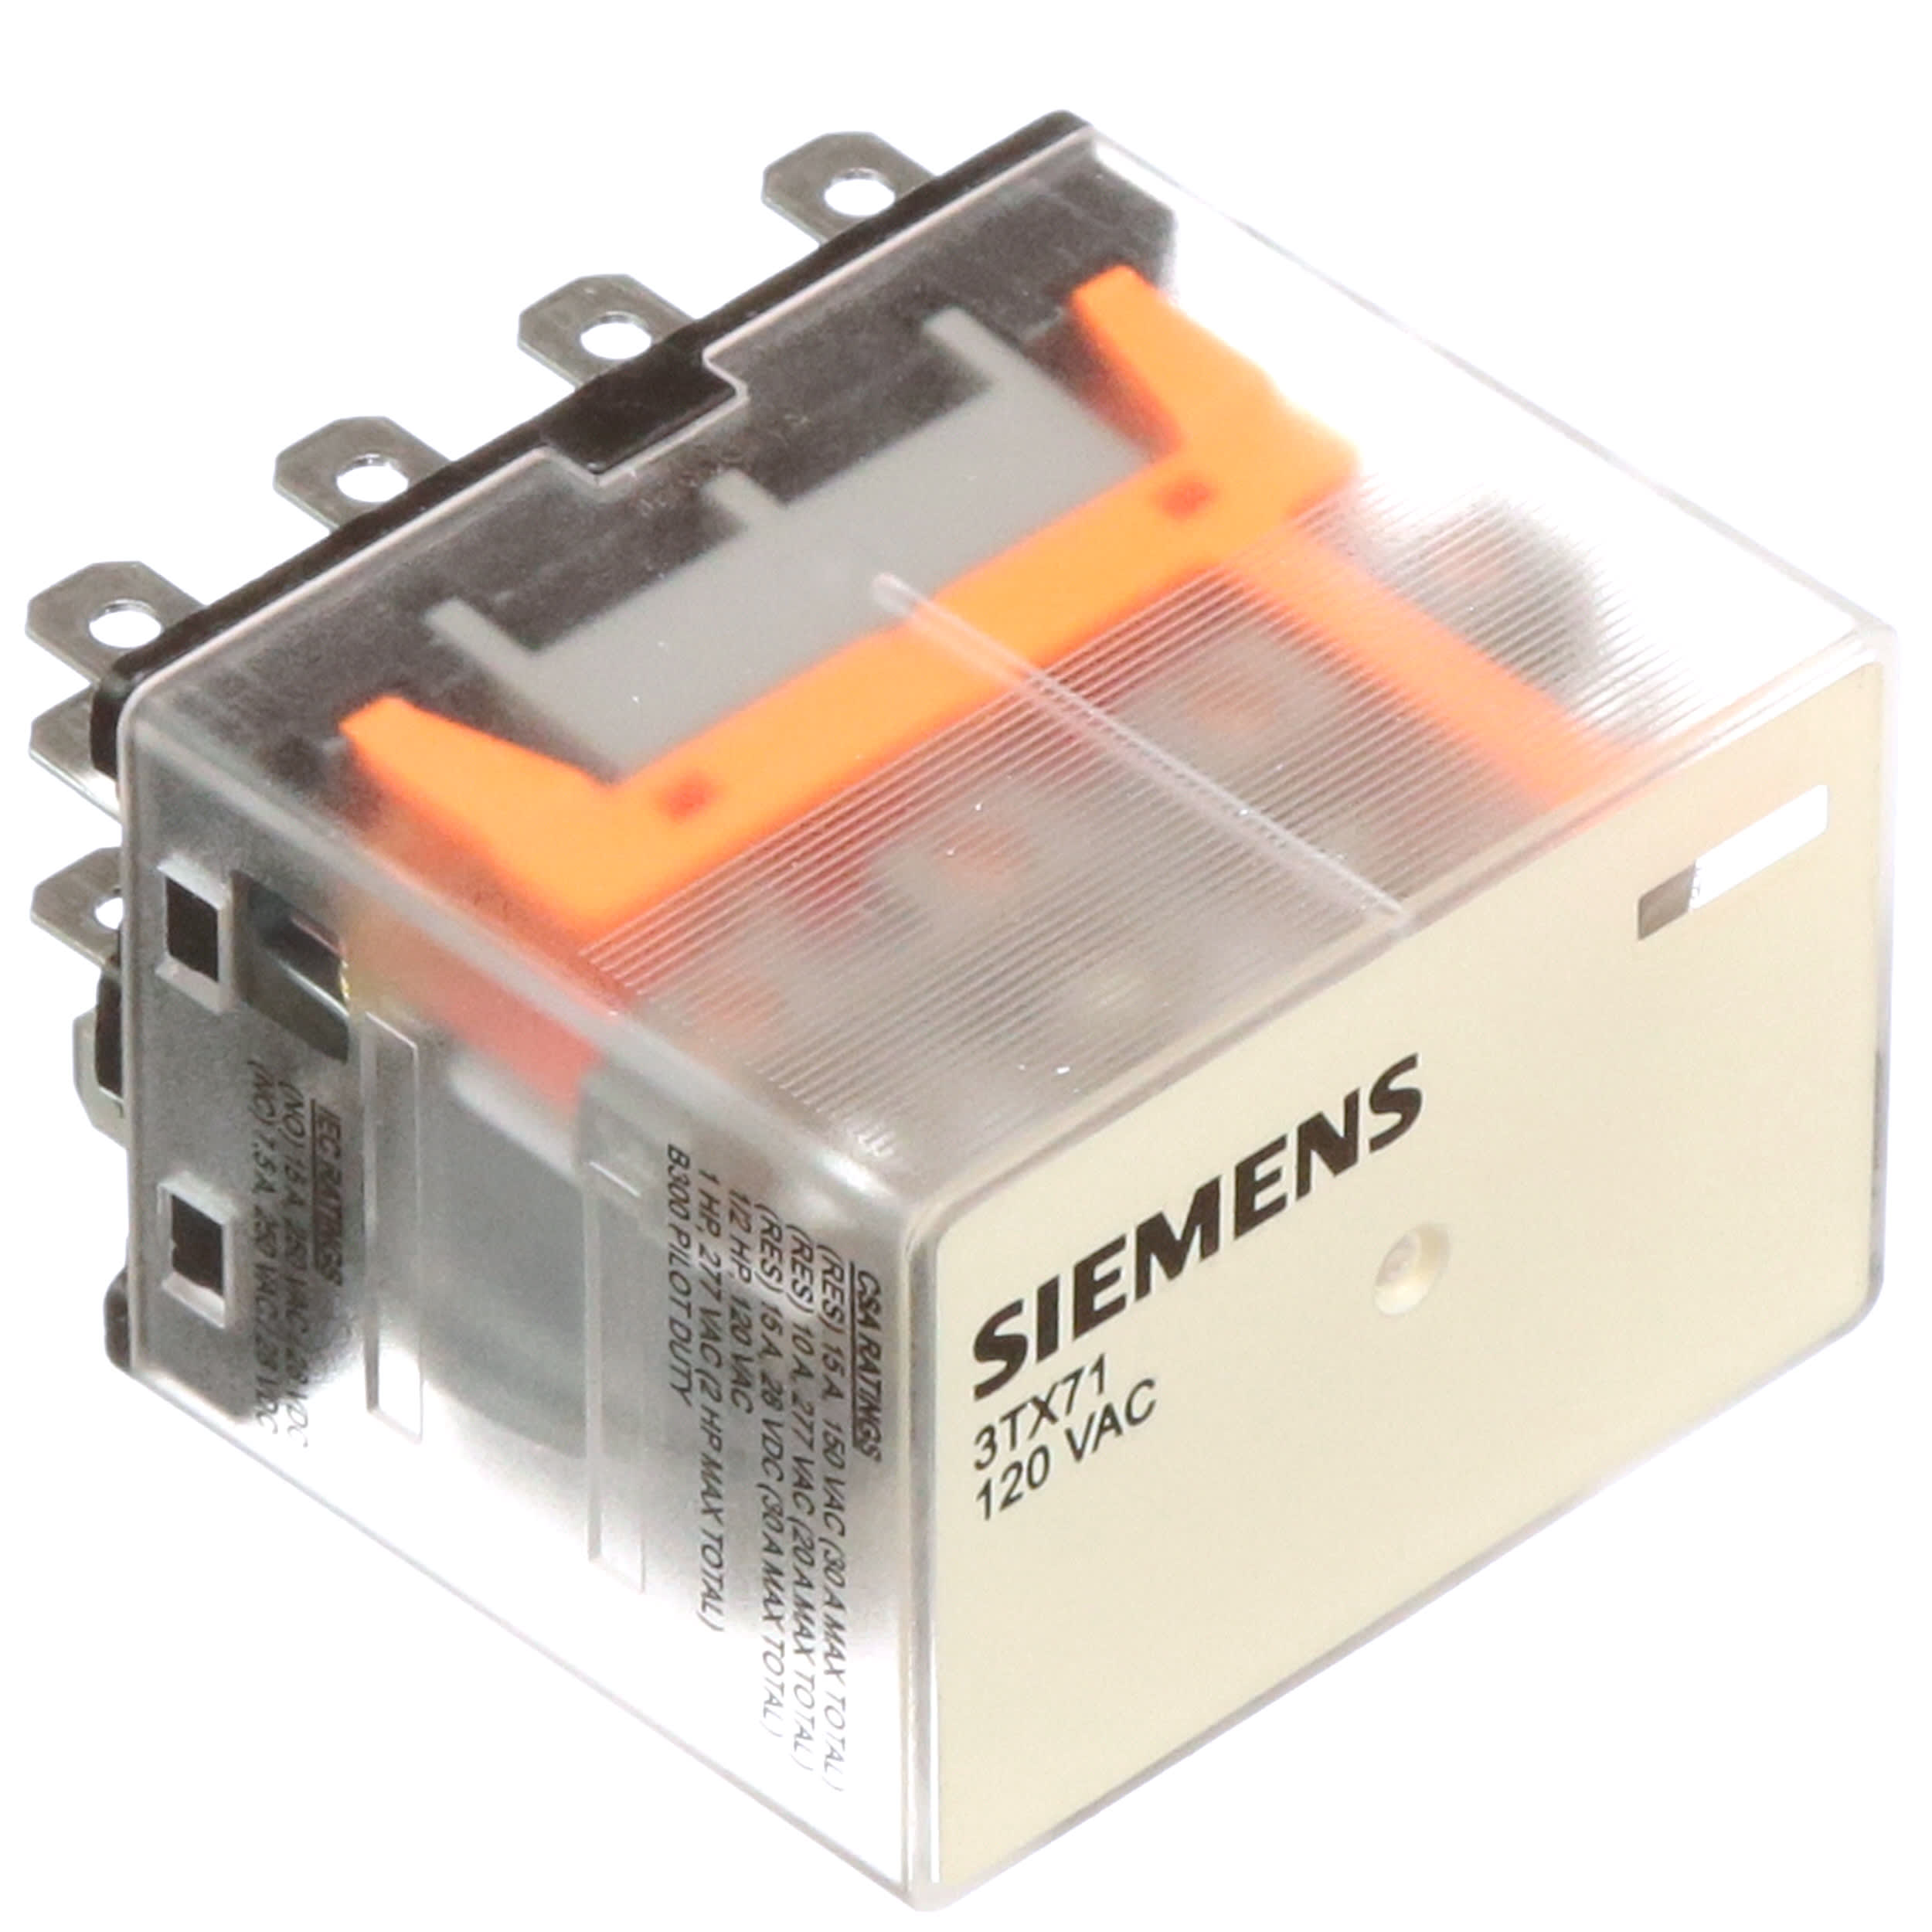 Mechanical Flag Square Base Narrow 4PDT Contacts Siemens 3TX7111-3HF13C Basic Plug In Relay 120VAC Coil Voltage 3RF29200HA36 10A Contact Rating 